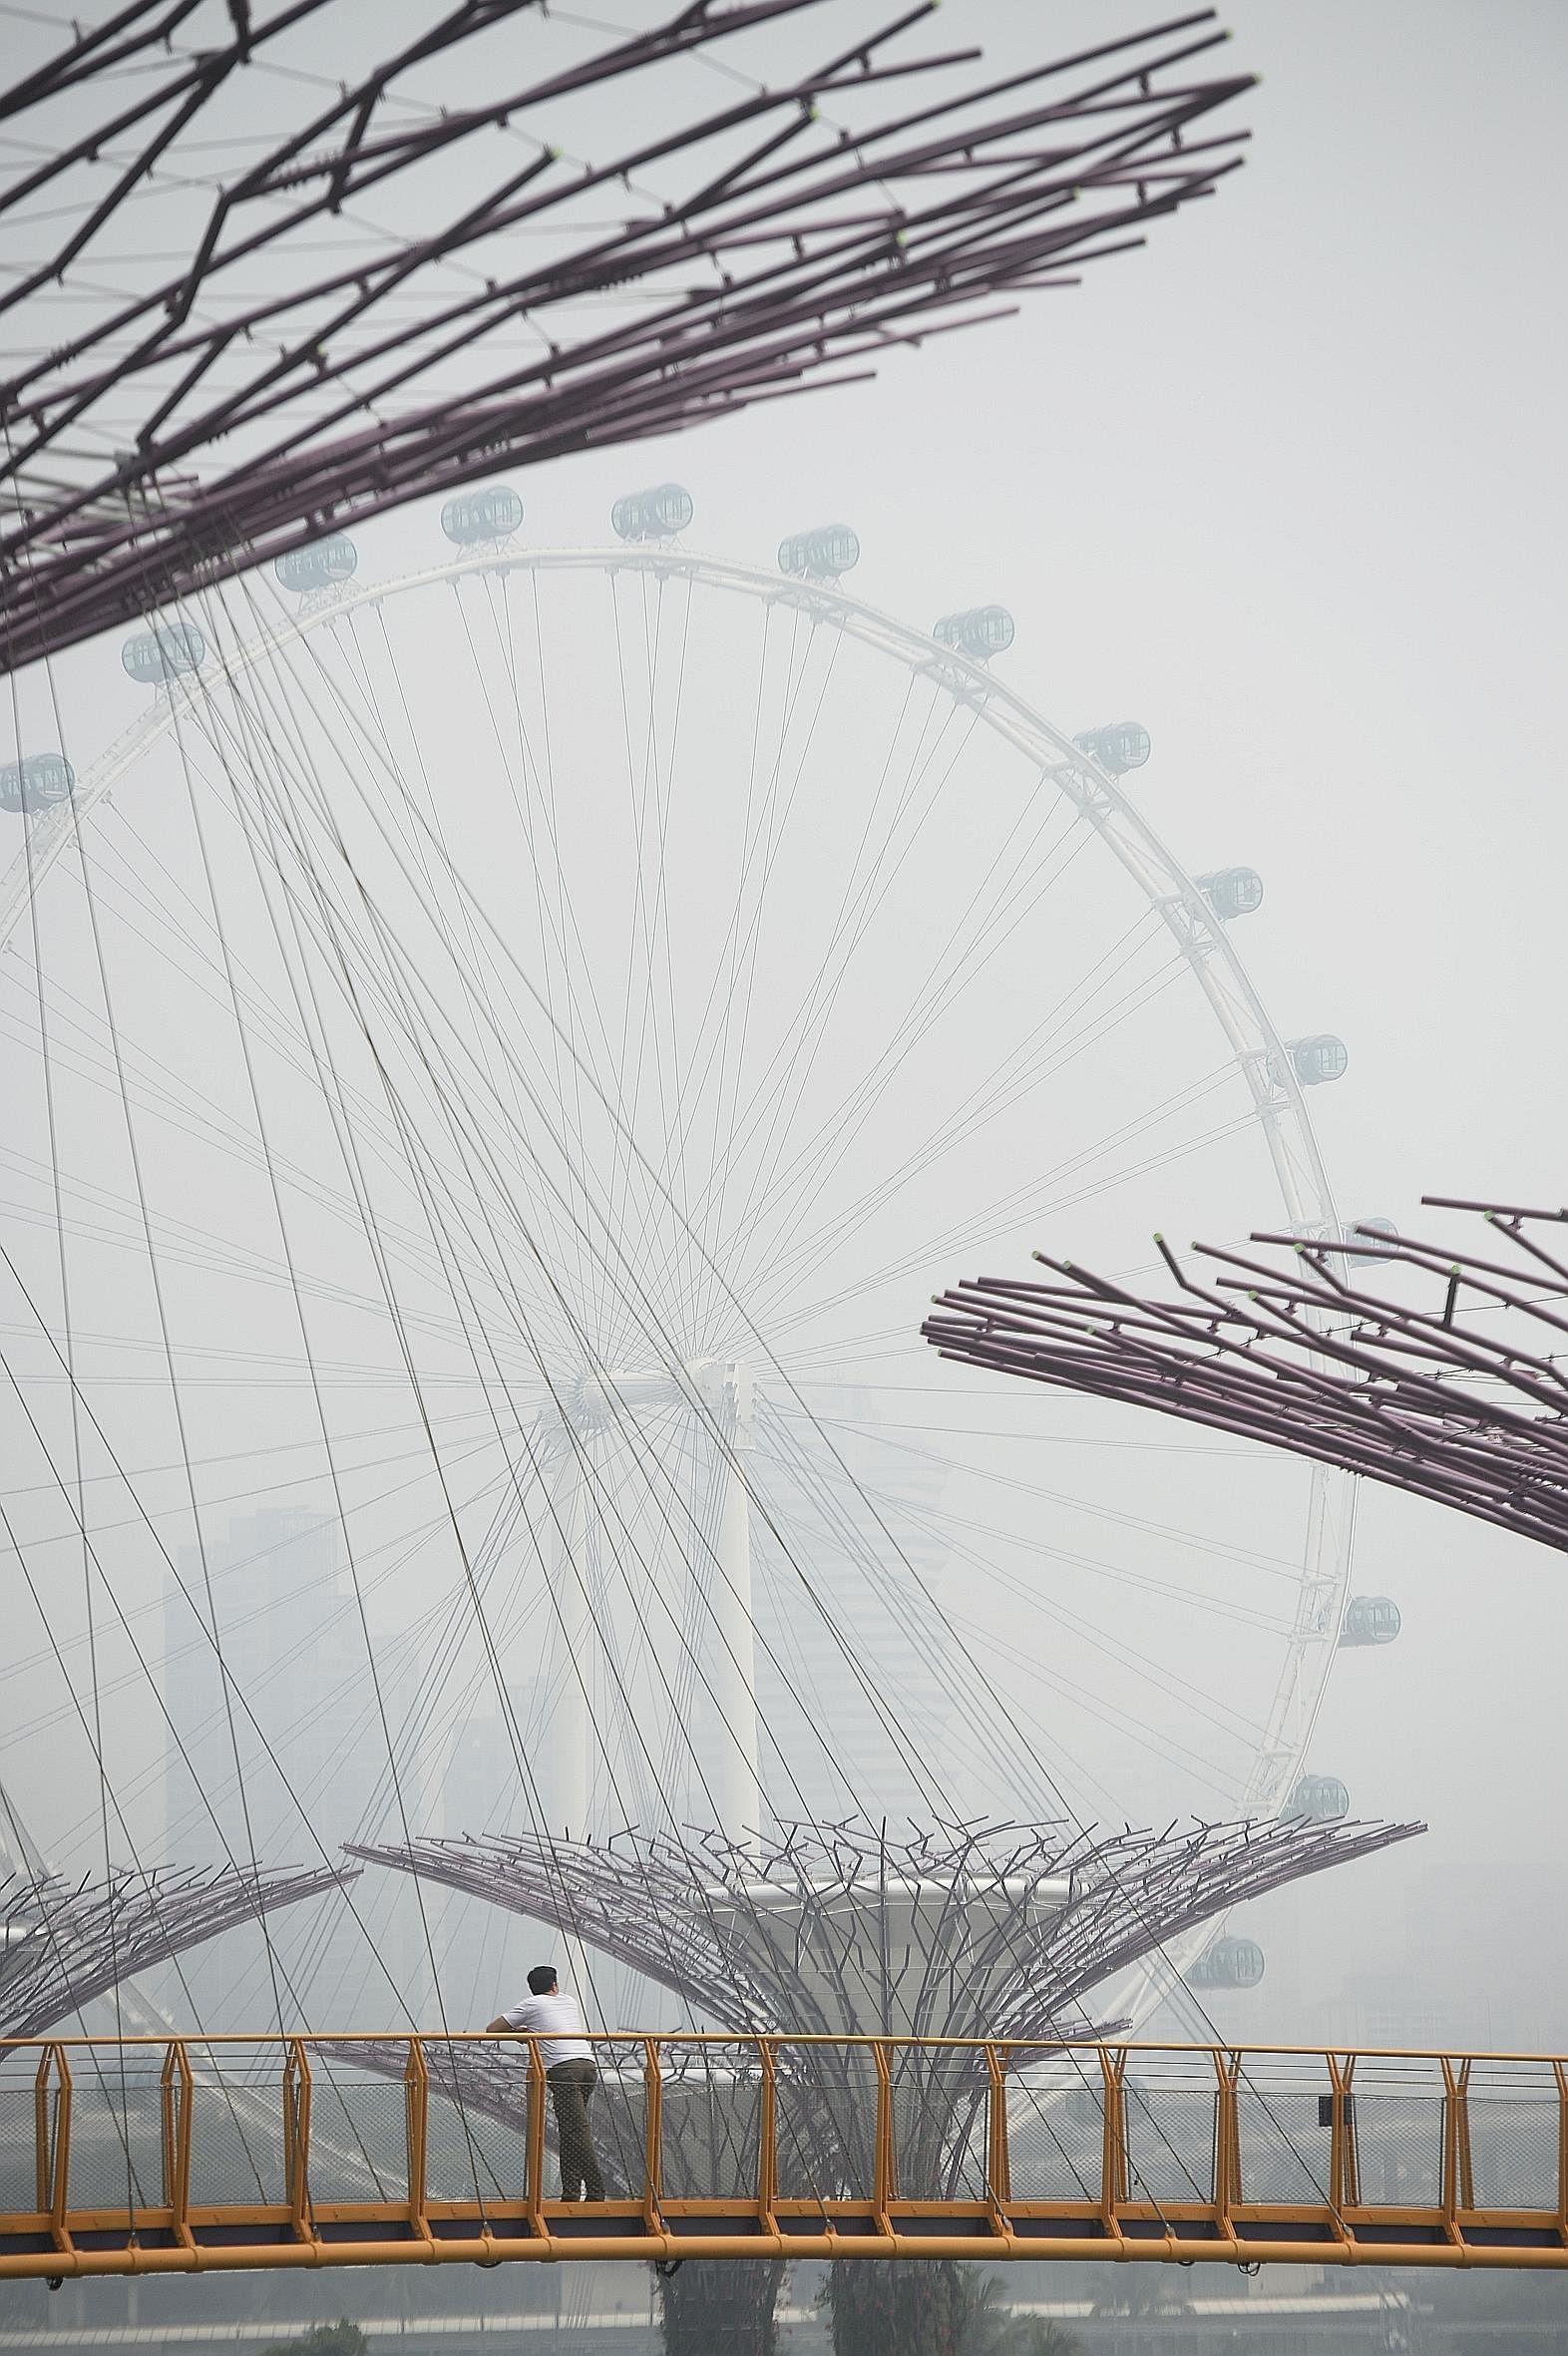 The Singapore Flyer obscured by haze, as seen from Gardens by the Bay yesterday morning. Prevailing winds continued to blow in haze from Sumatra yesterday, causing the air quality here to deteriorate.